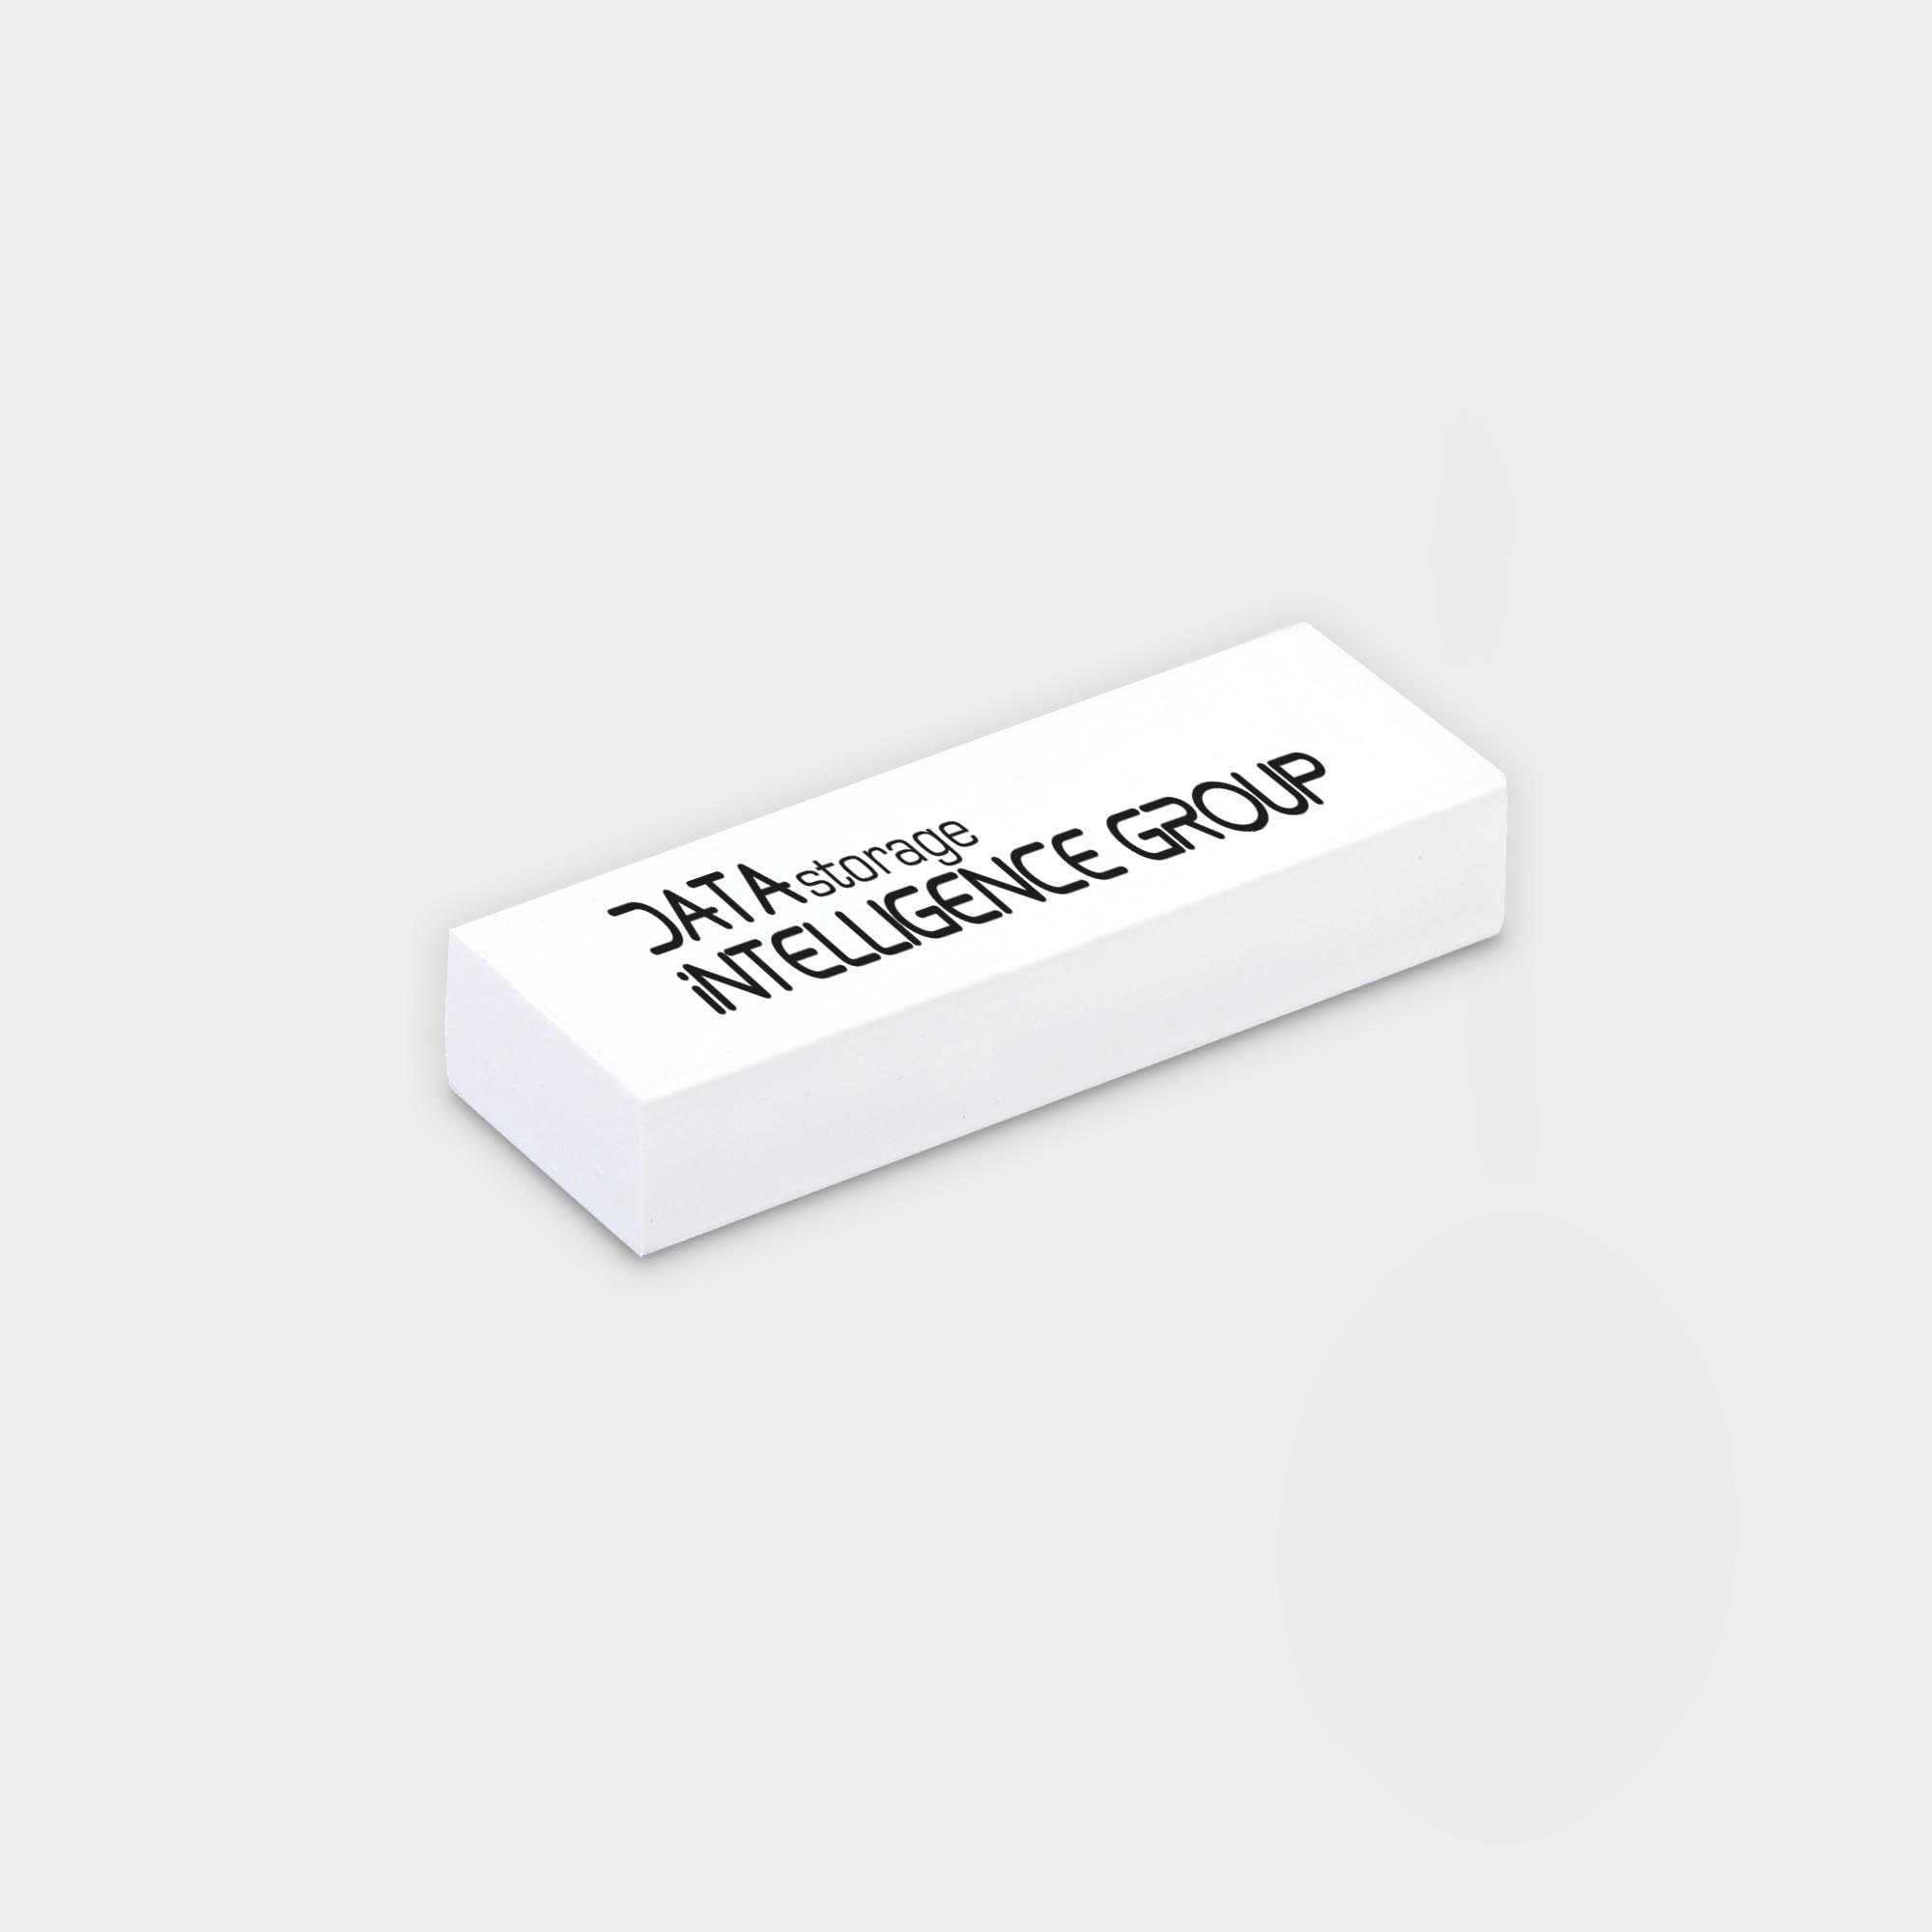 The Green & Good Eraser is a great addition to an eco-friendly office. Made in the EU from PVC- and phthalate free synthetic rubber. Large print area for your logo or message.